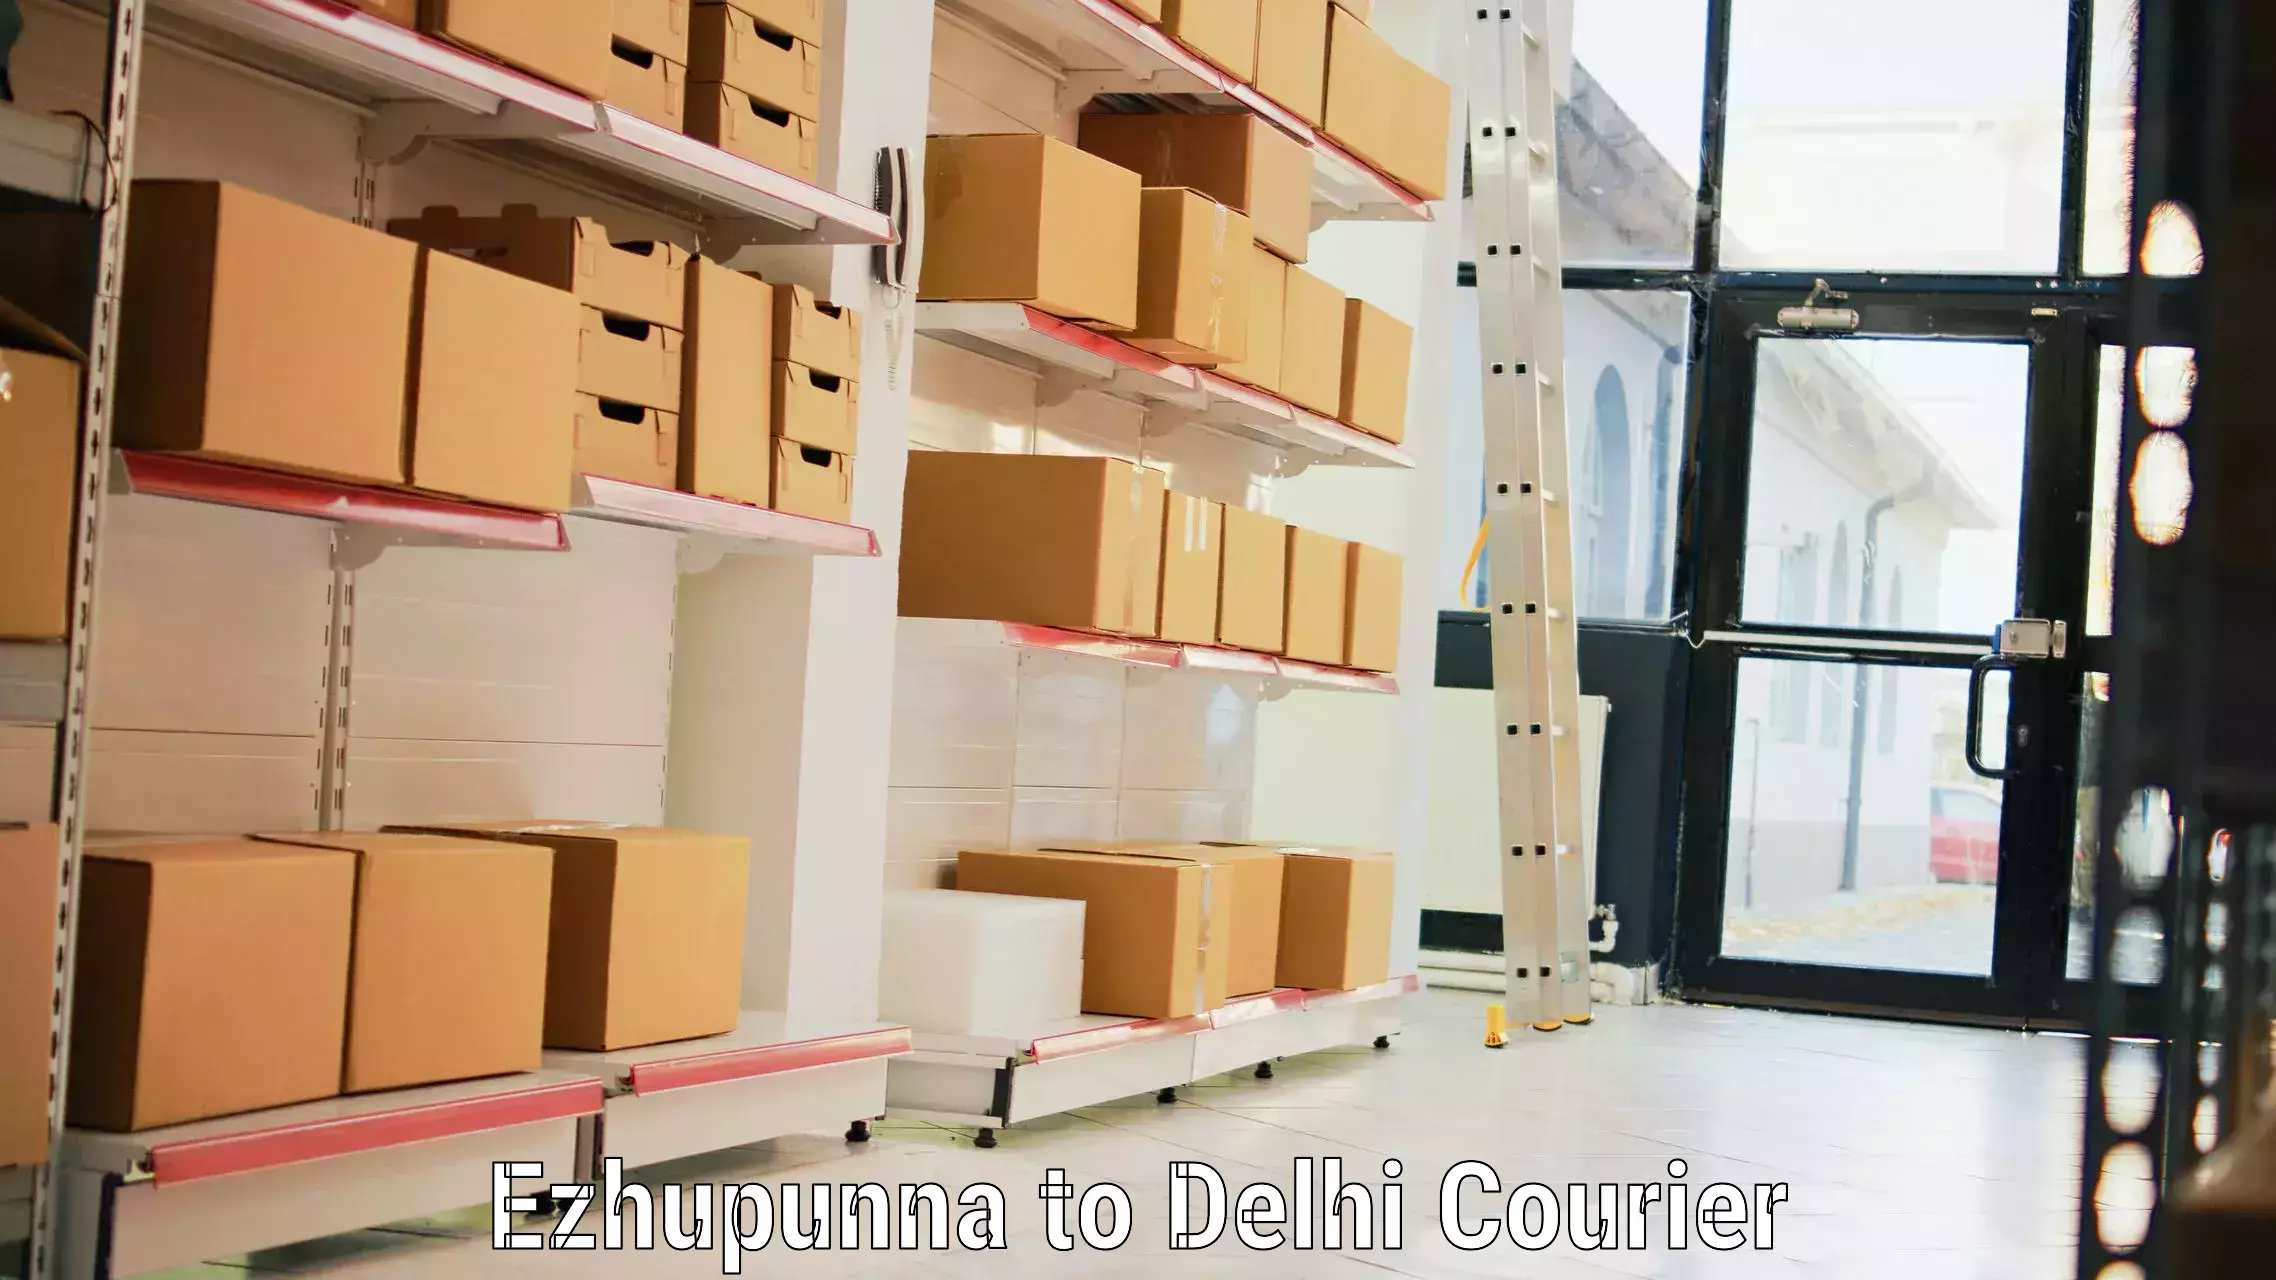 Professional baggage transport in Ezhupunna to NCR